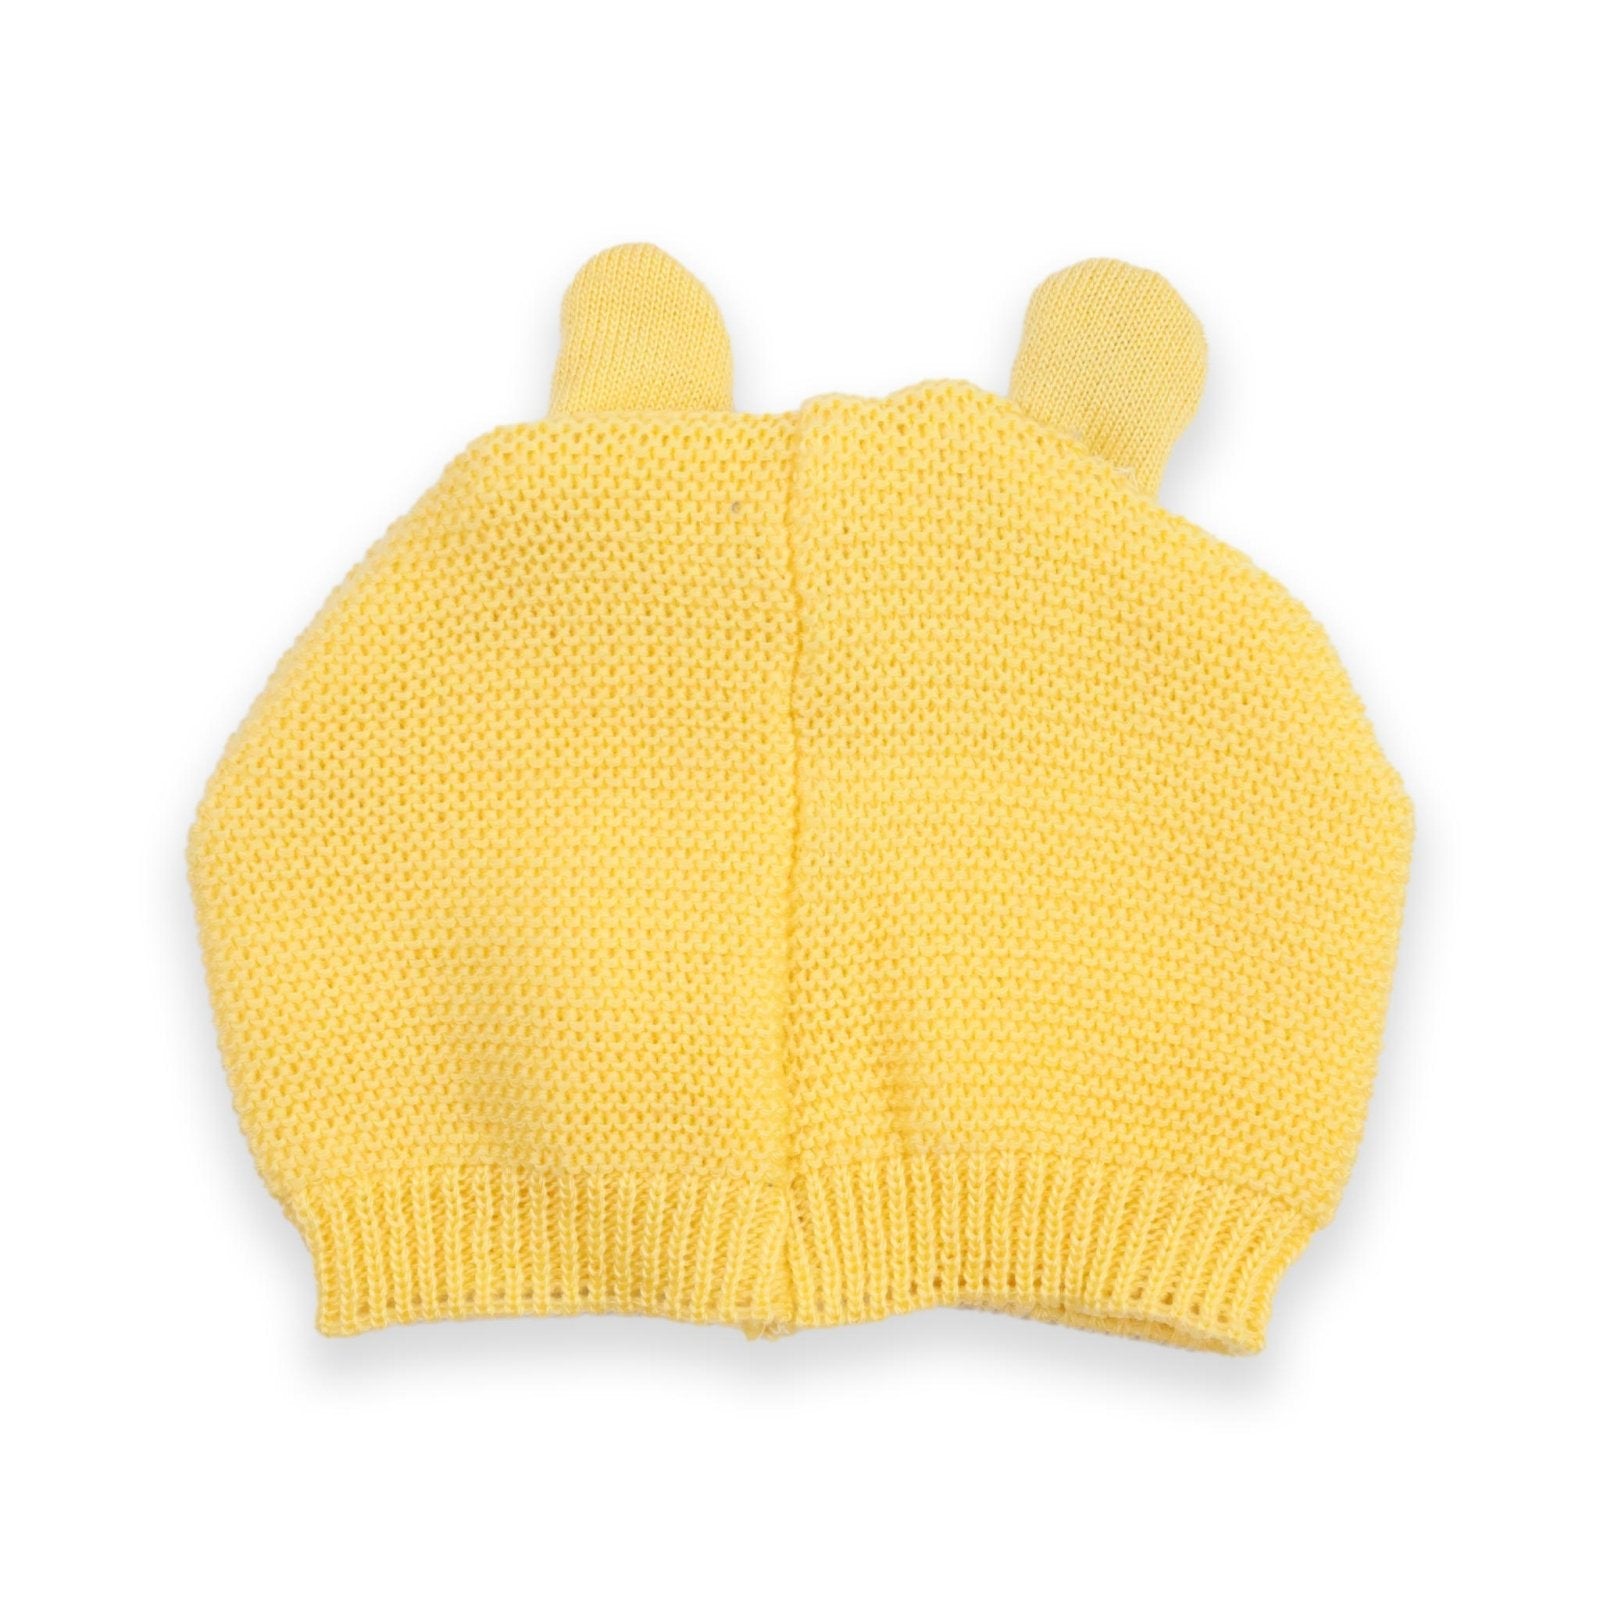 4 Pcs Woolen Gift Set Light Yellow Color by Little Darling